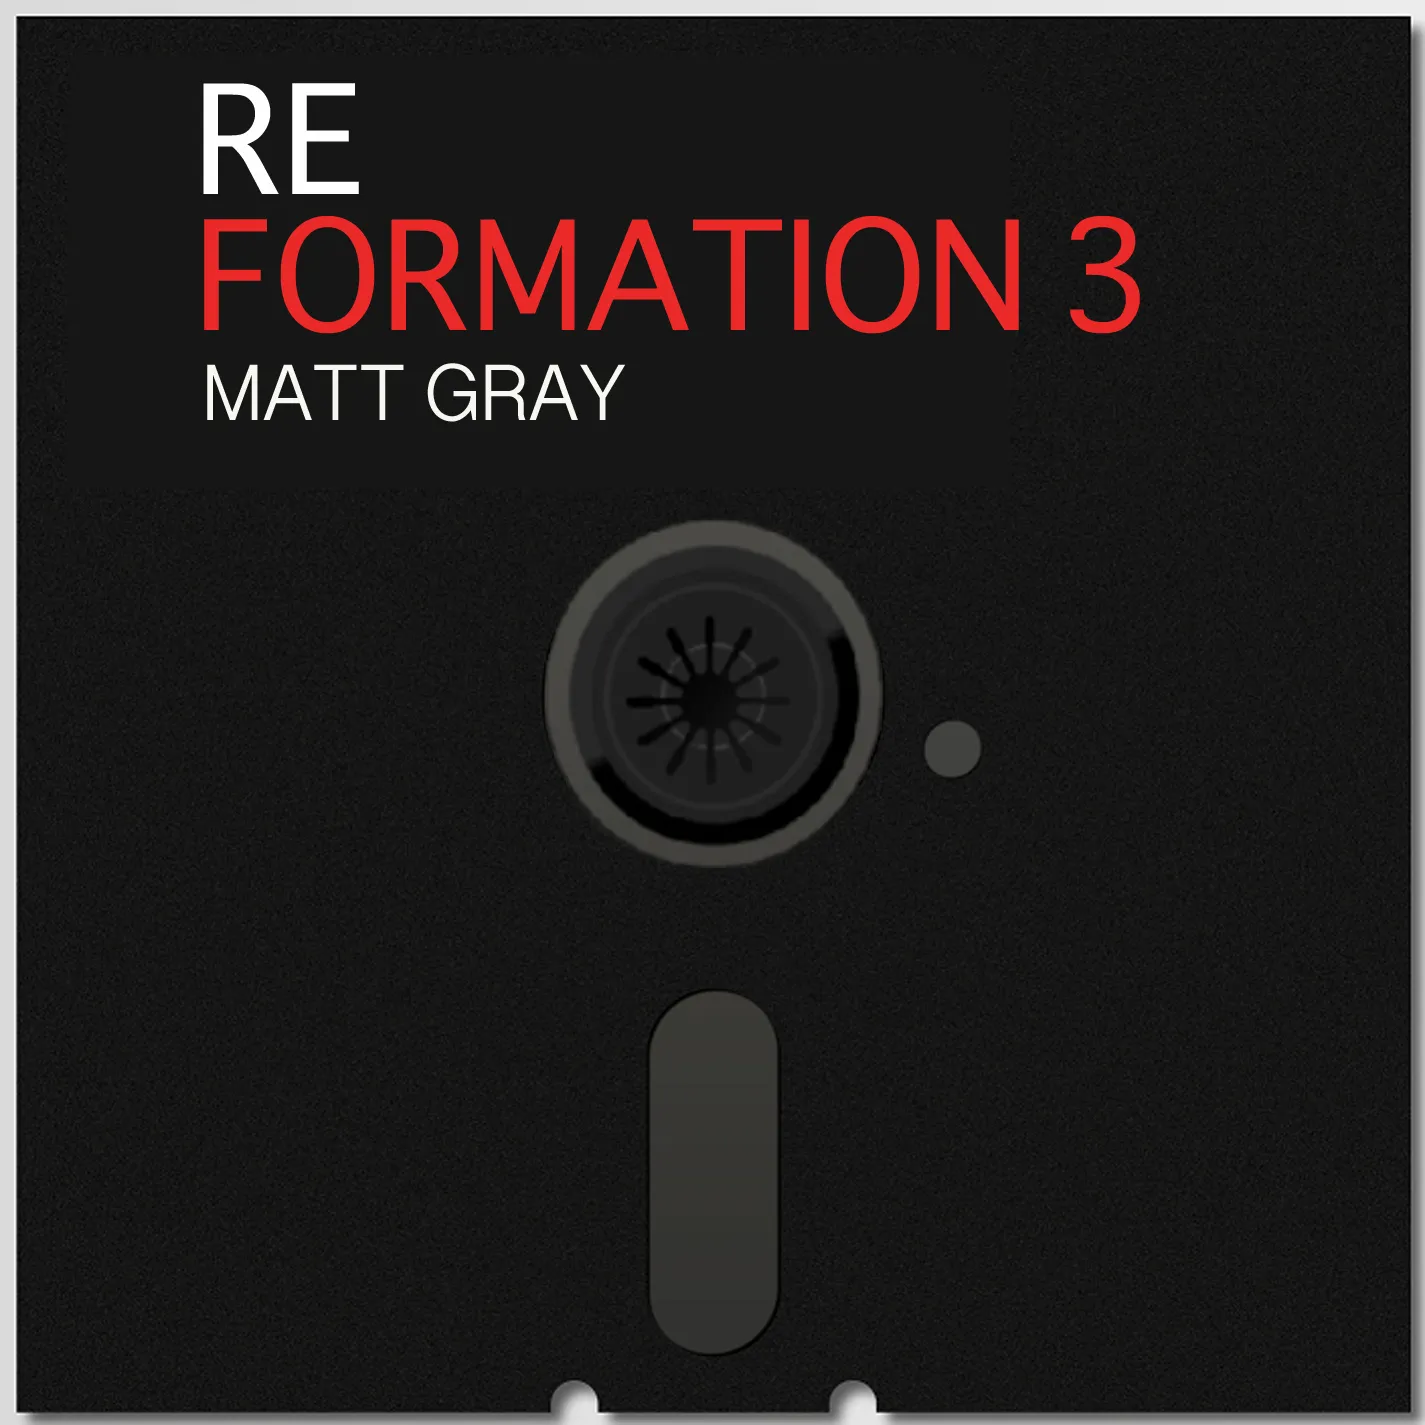 Reformation 3 front cover
© (C) 2020 6581 Records